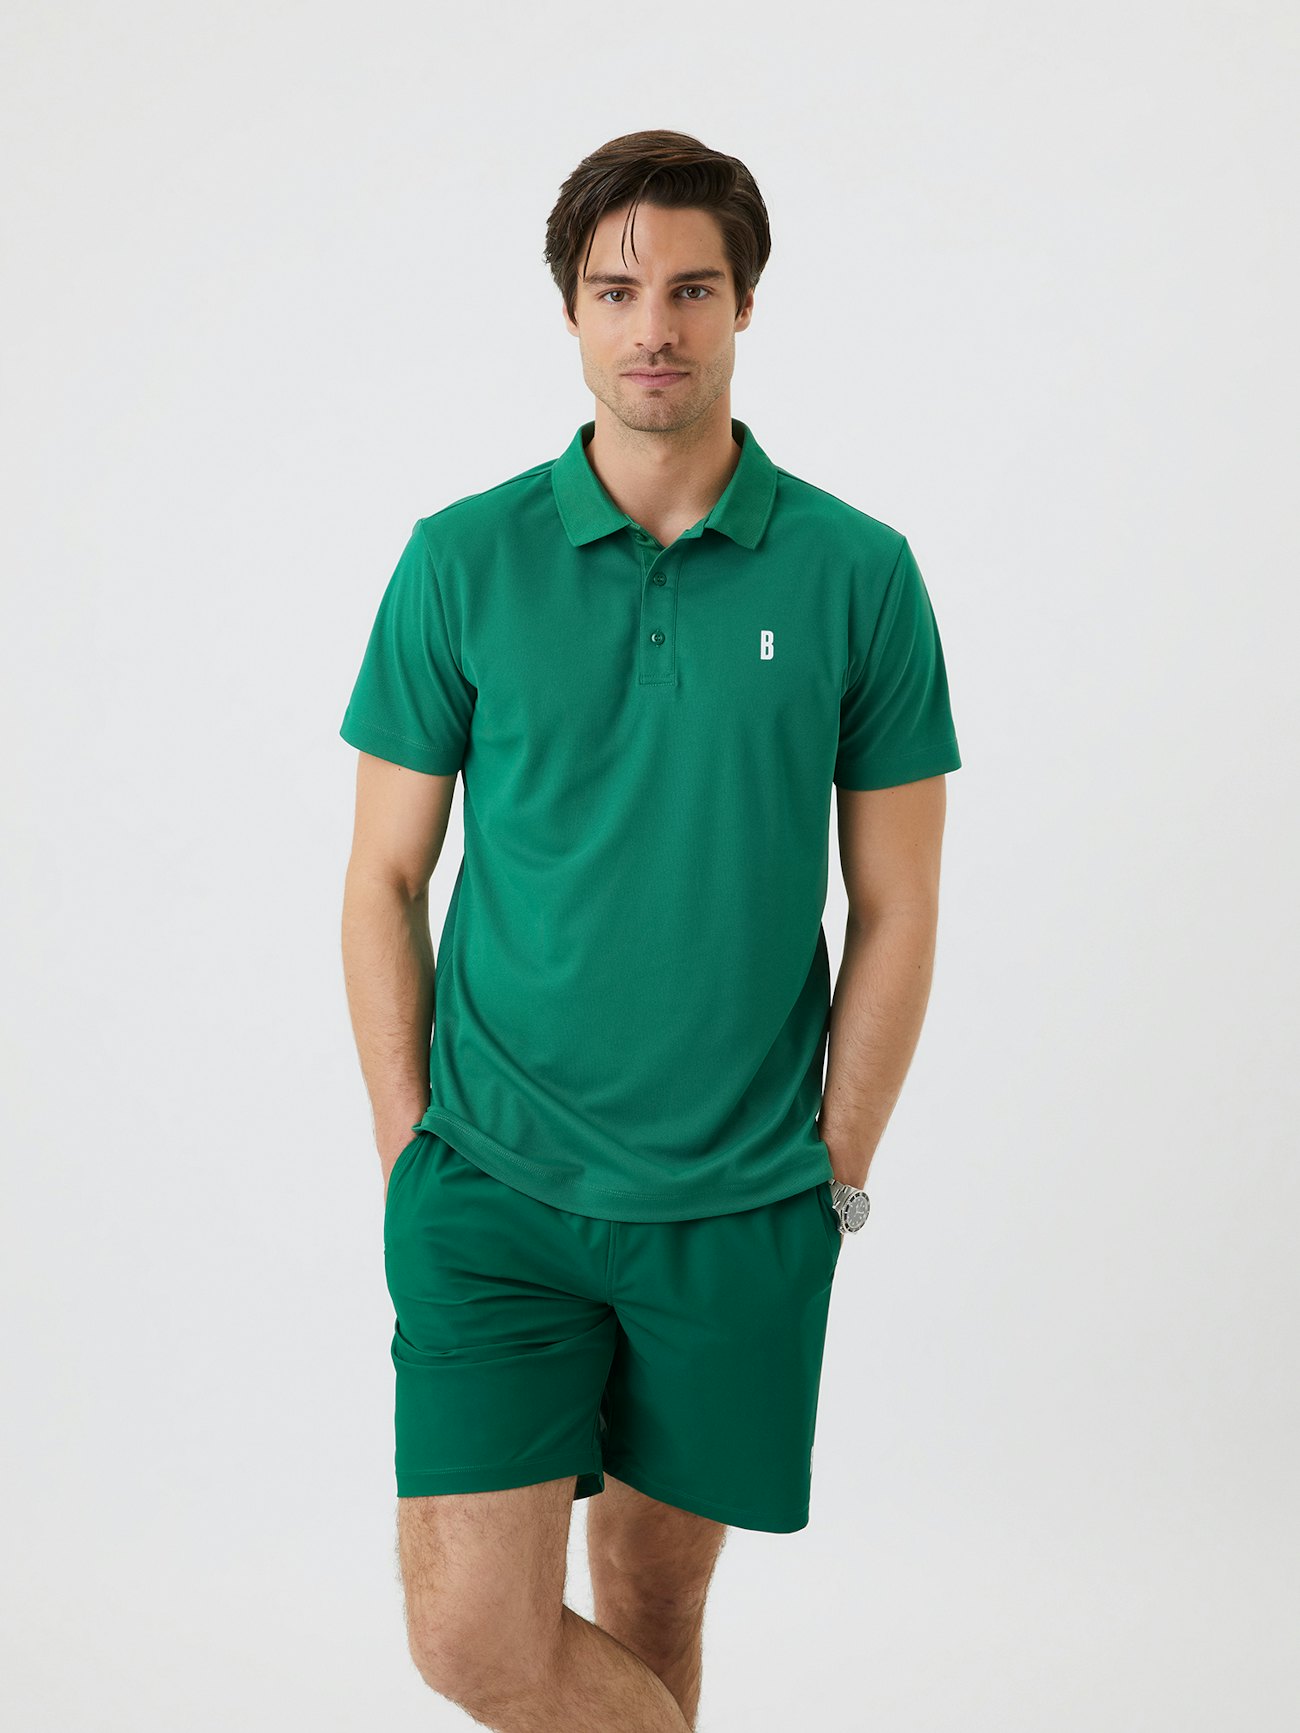 frequentie Kluisje Panorama Ace Polo - Verdant Green | Men | Björn Borg